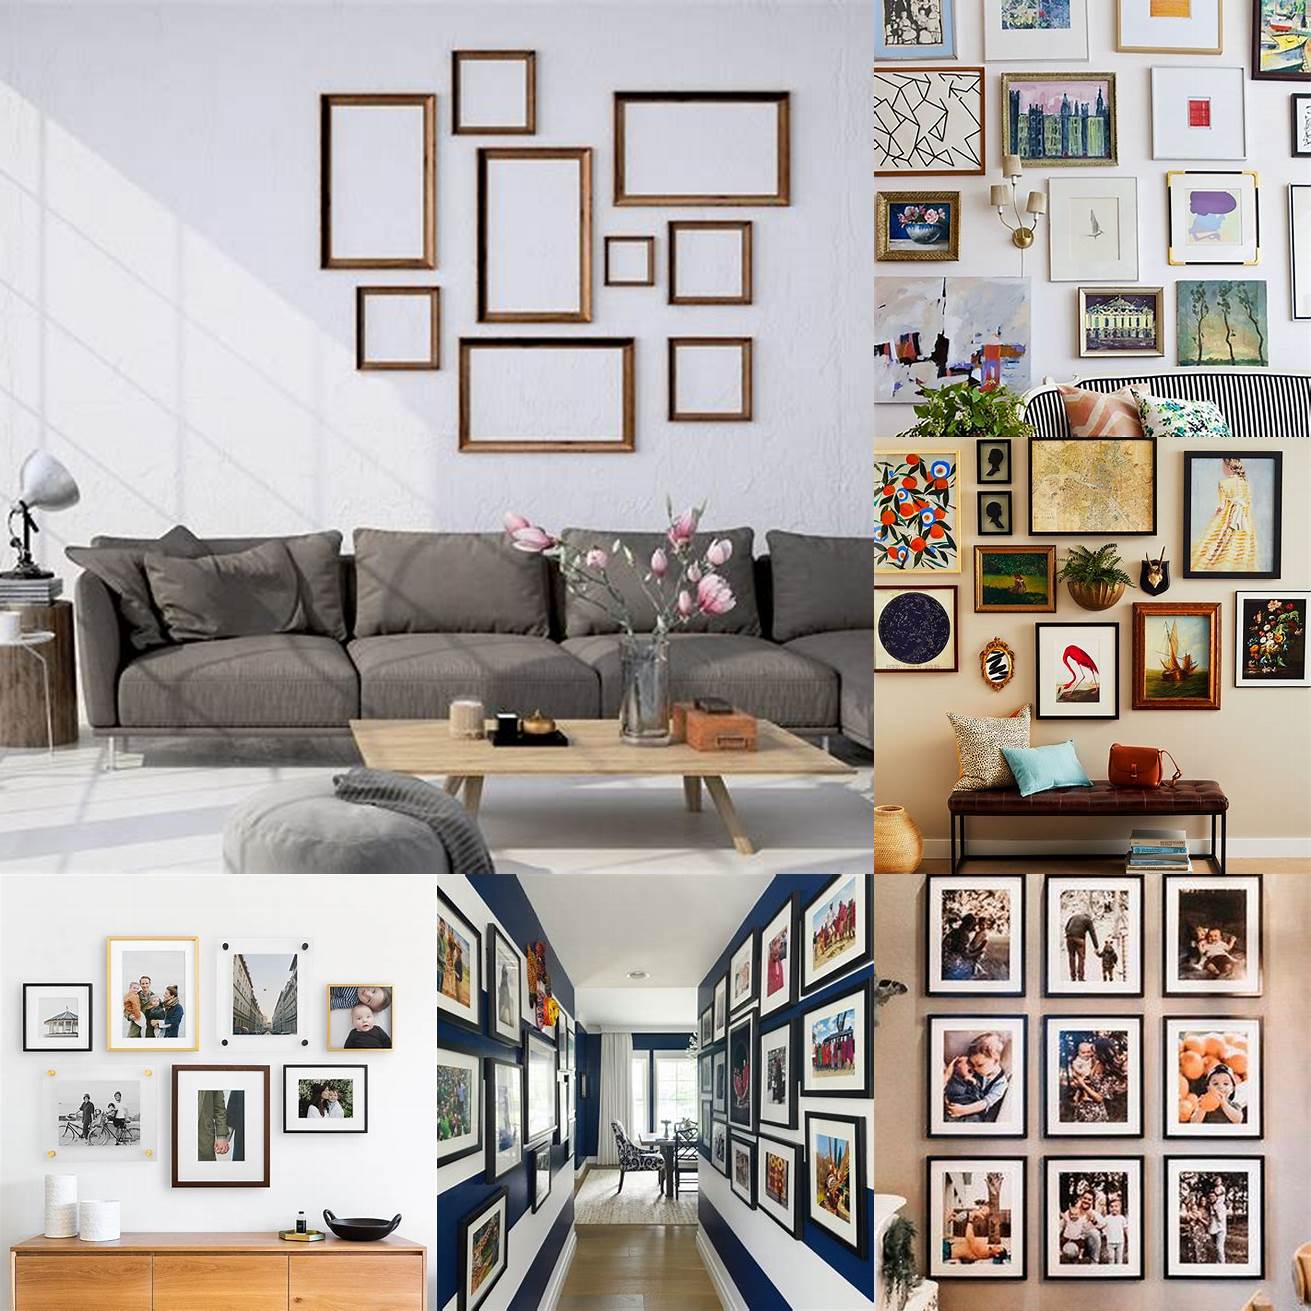 Showcase your individual style with a personalized gallery wall